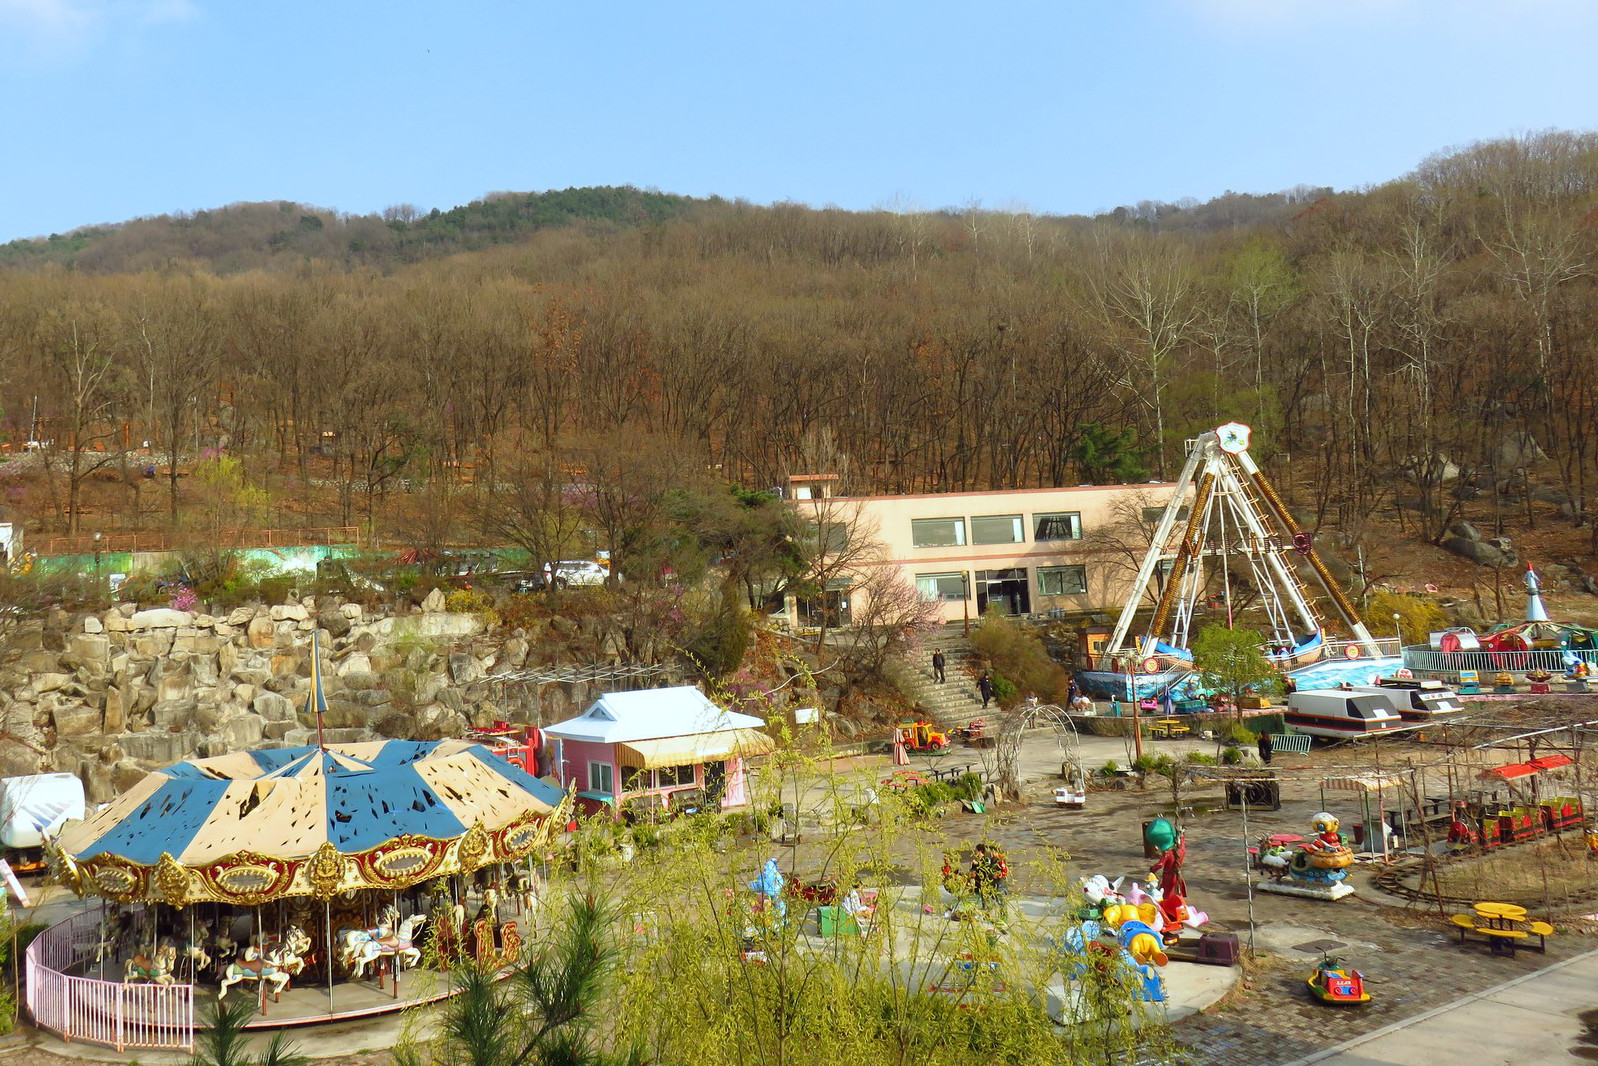 Yongma Land: abandoned amusement park near Seoul. Image by Phillip Tang / Lonely Planet